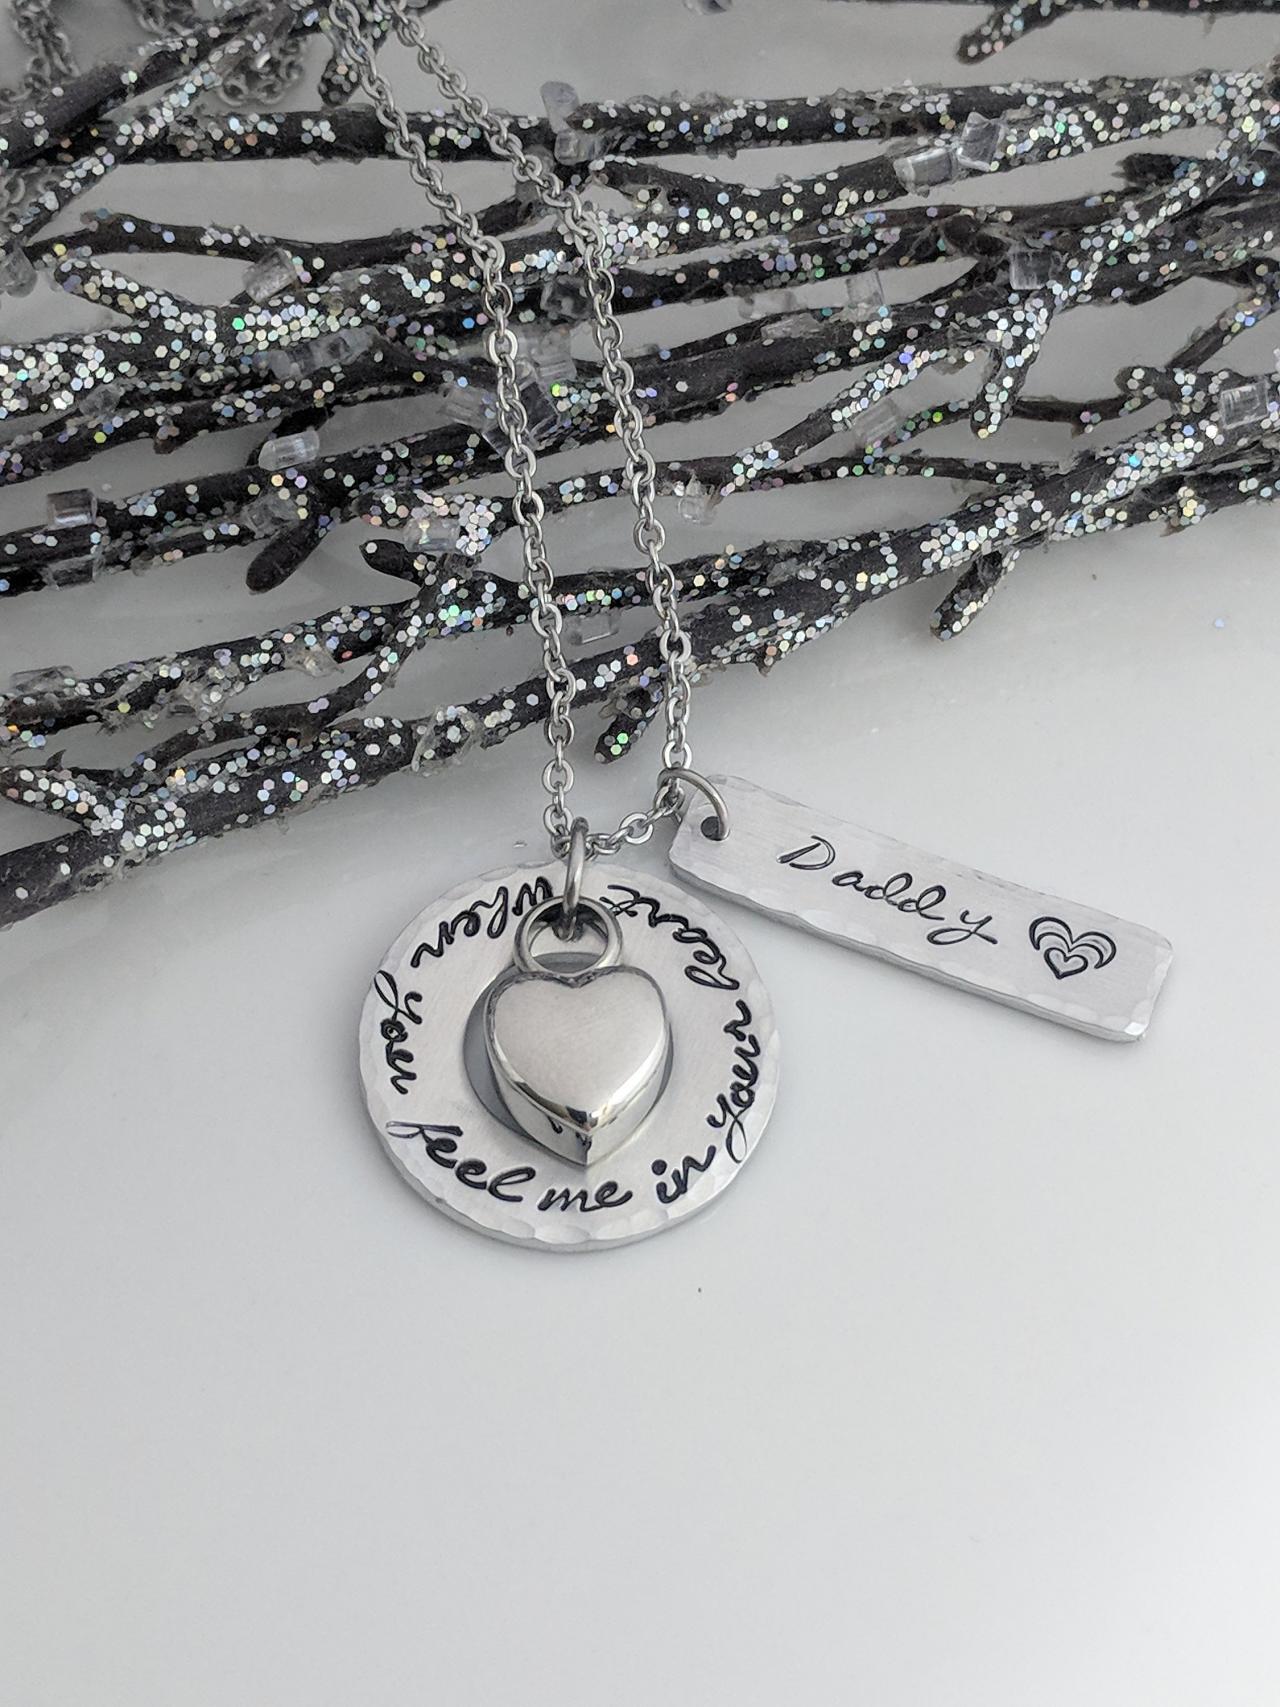 Urn Necklace- Cremation Jewelry- Keepsake- Memorial- Loss Of Loved One- Human Ashes Urn- When You Feel Me In Your Heart- Personalized-grief